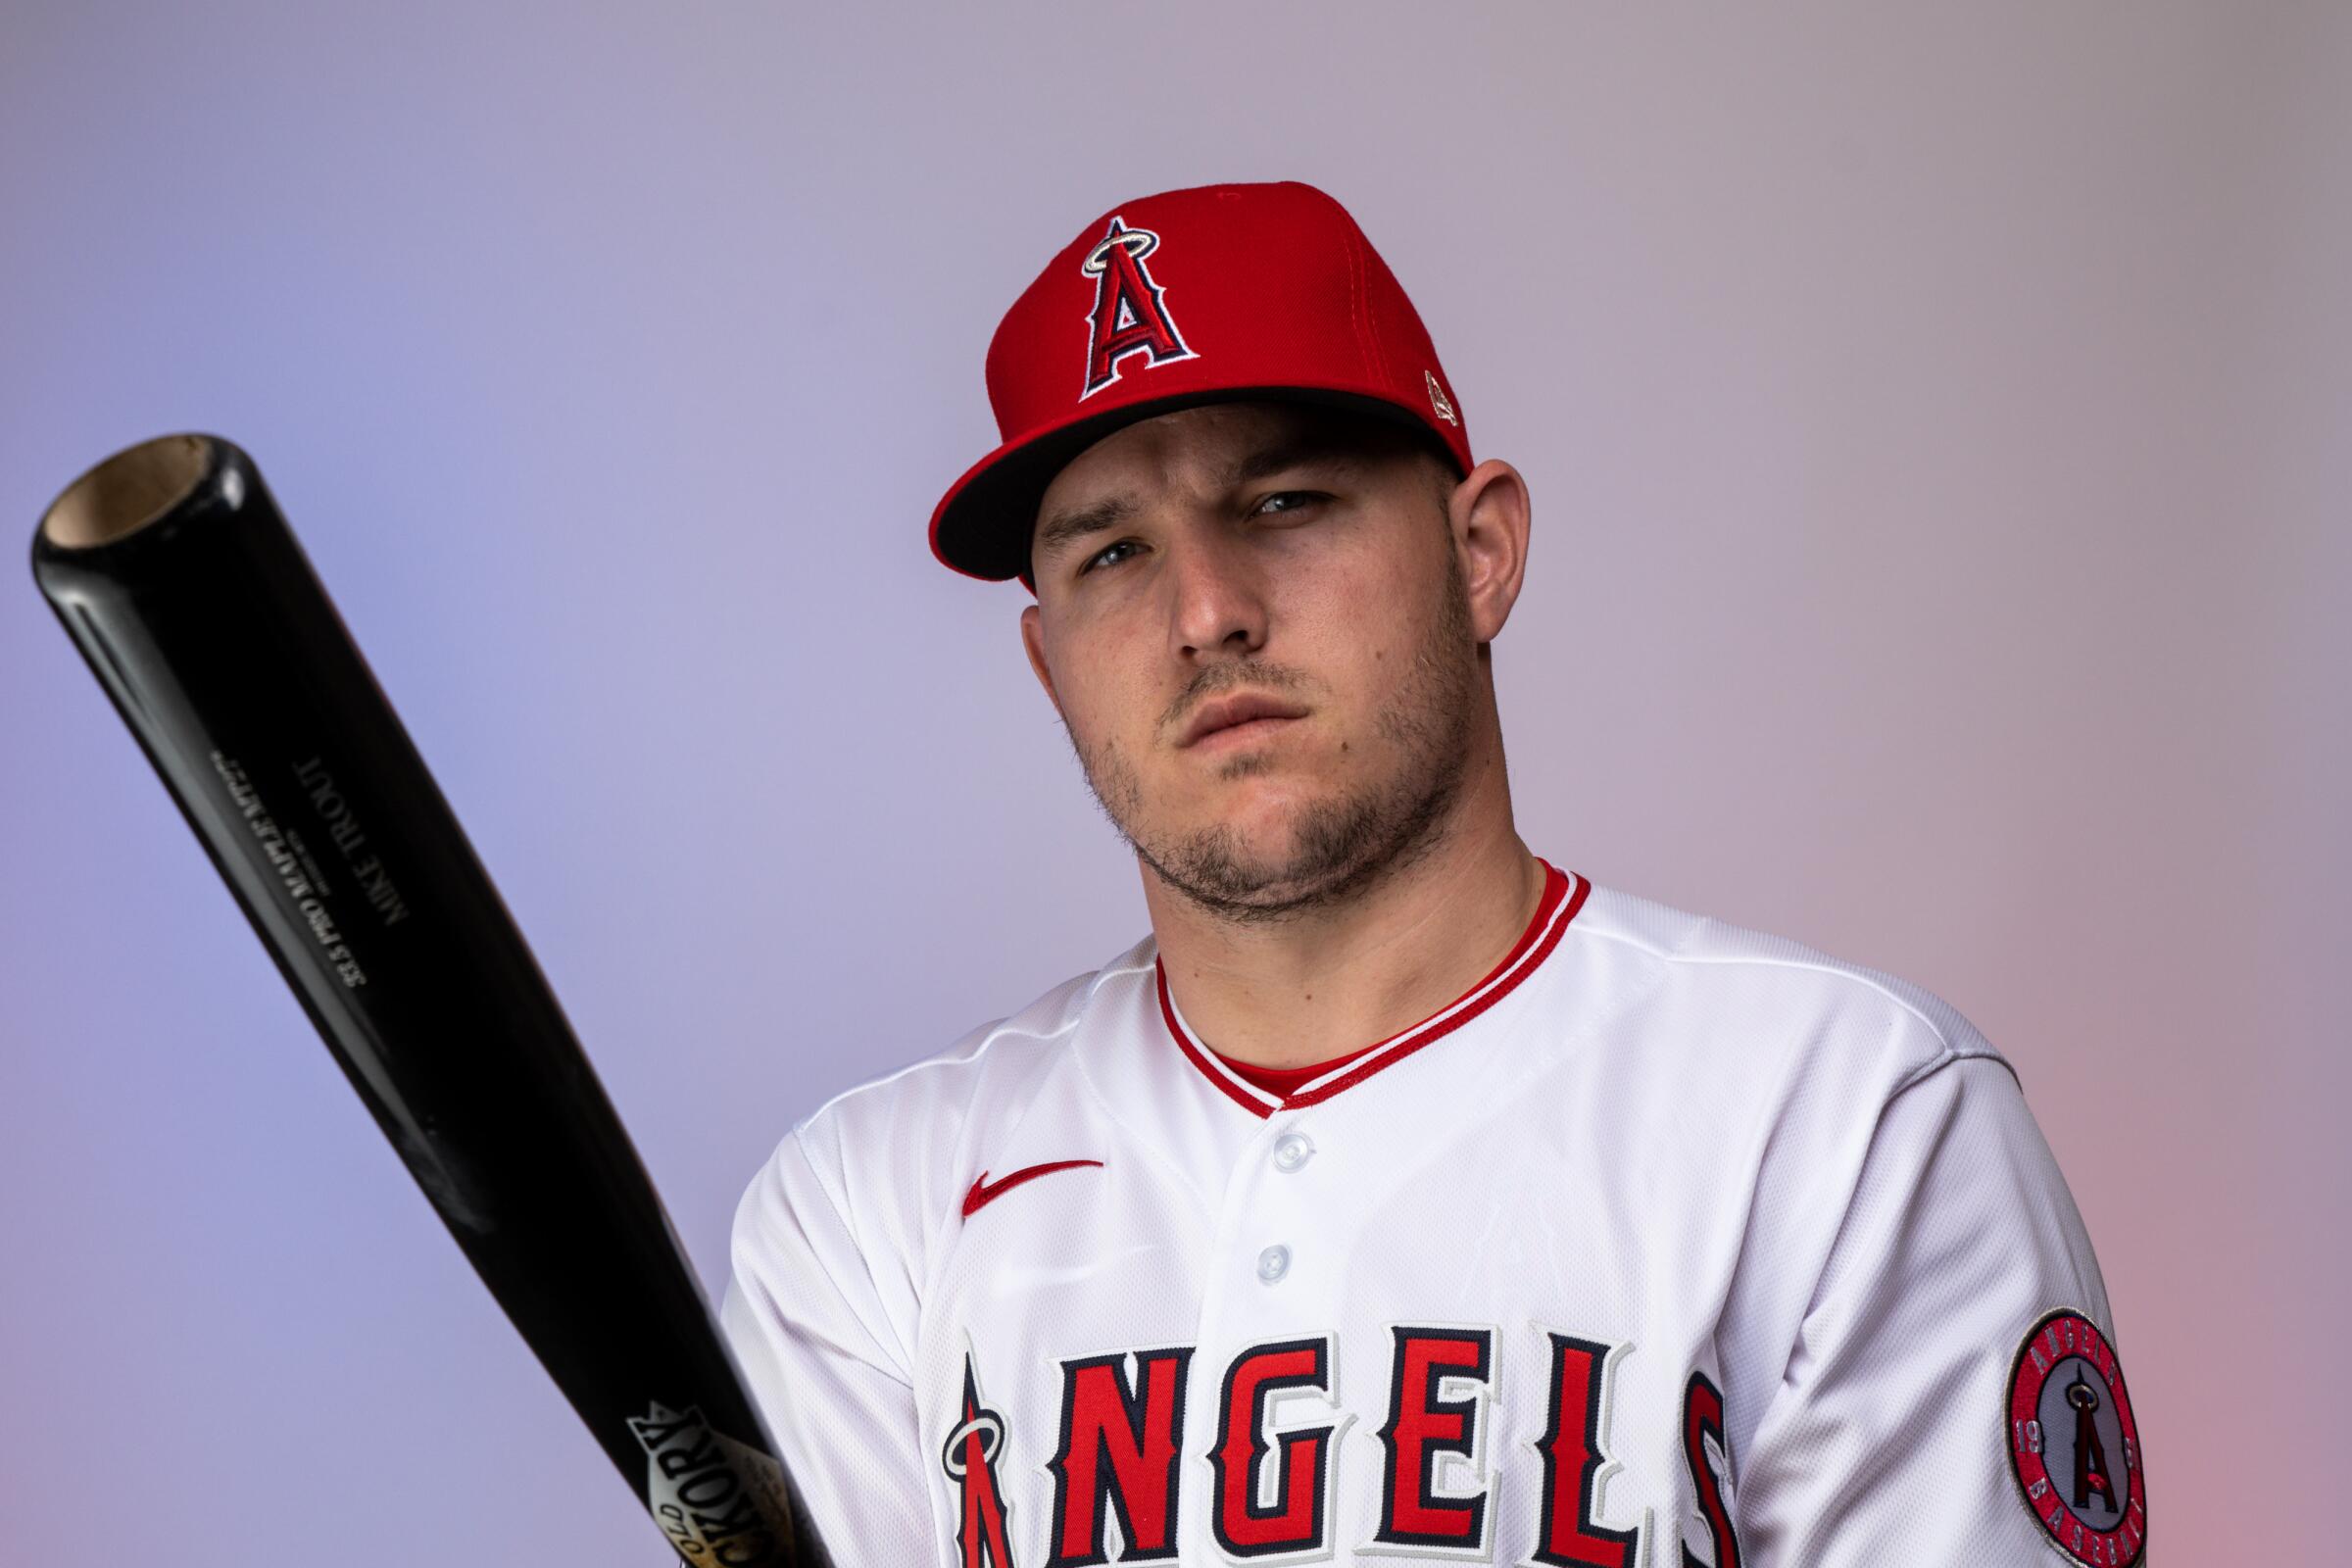 Angels outfielder Mike Trout.